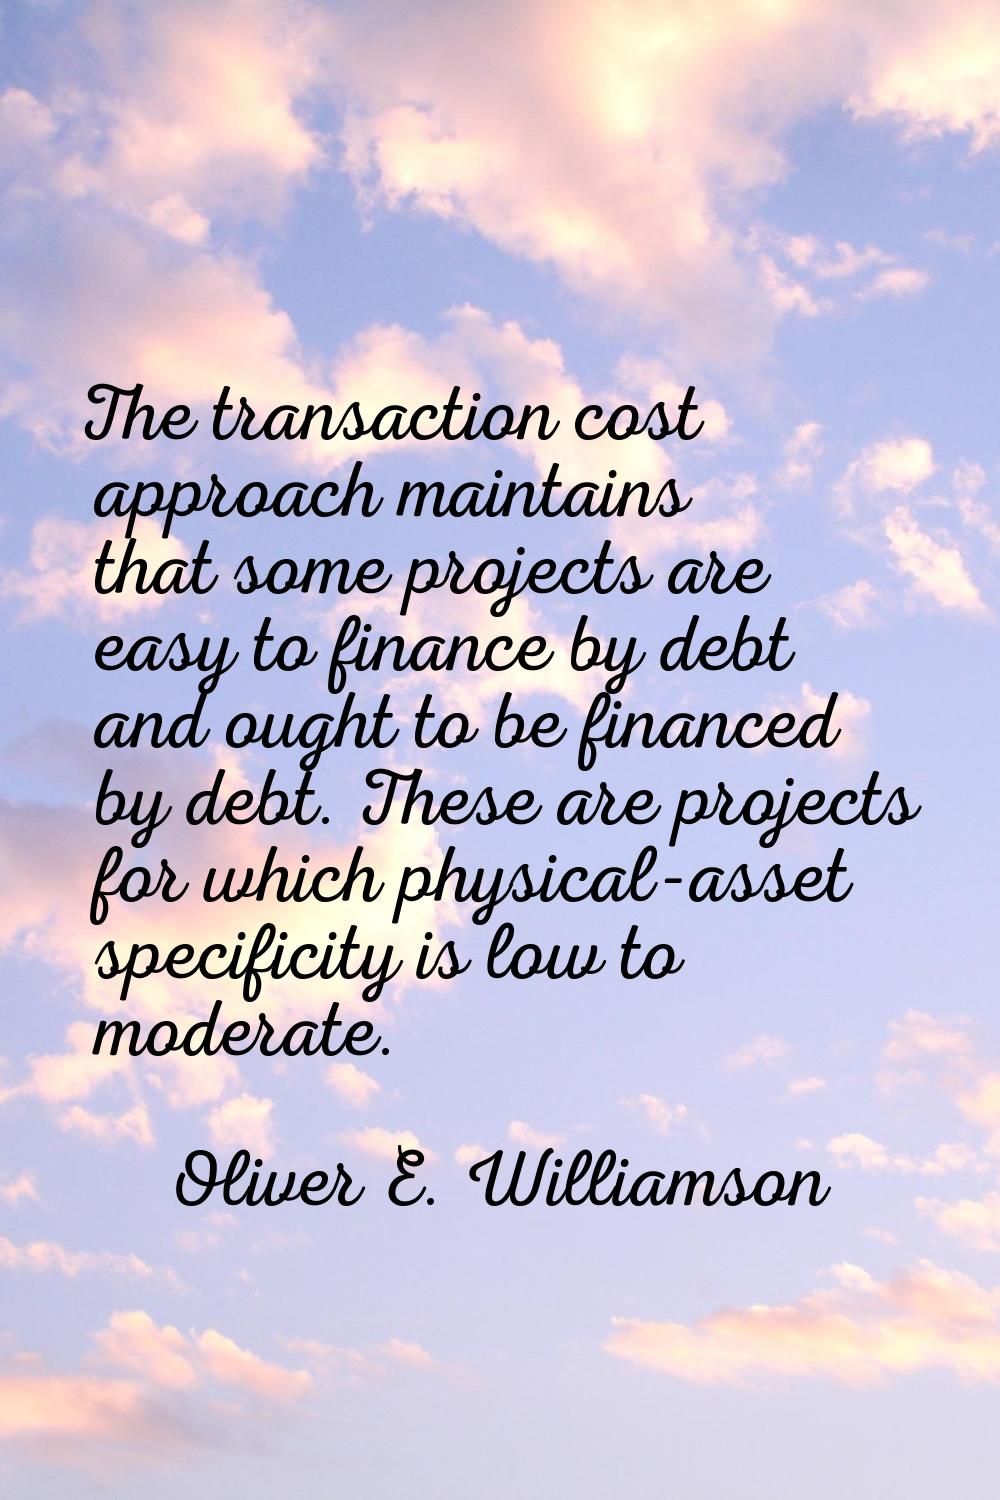 The transaction cost approach maintains that some projects are easy to finance by debt and ought to